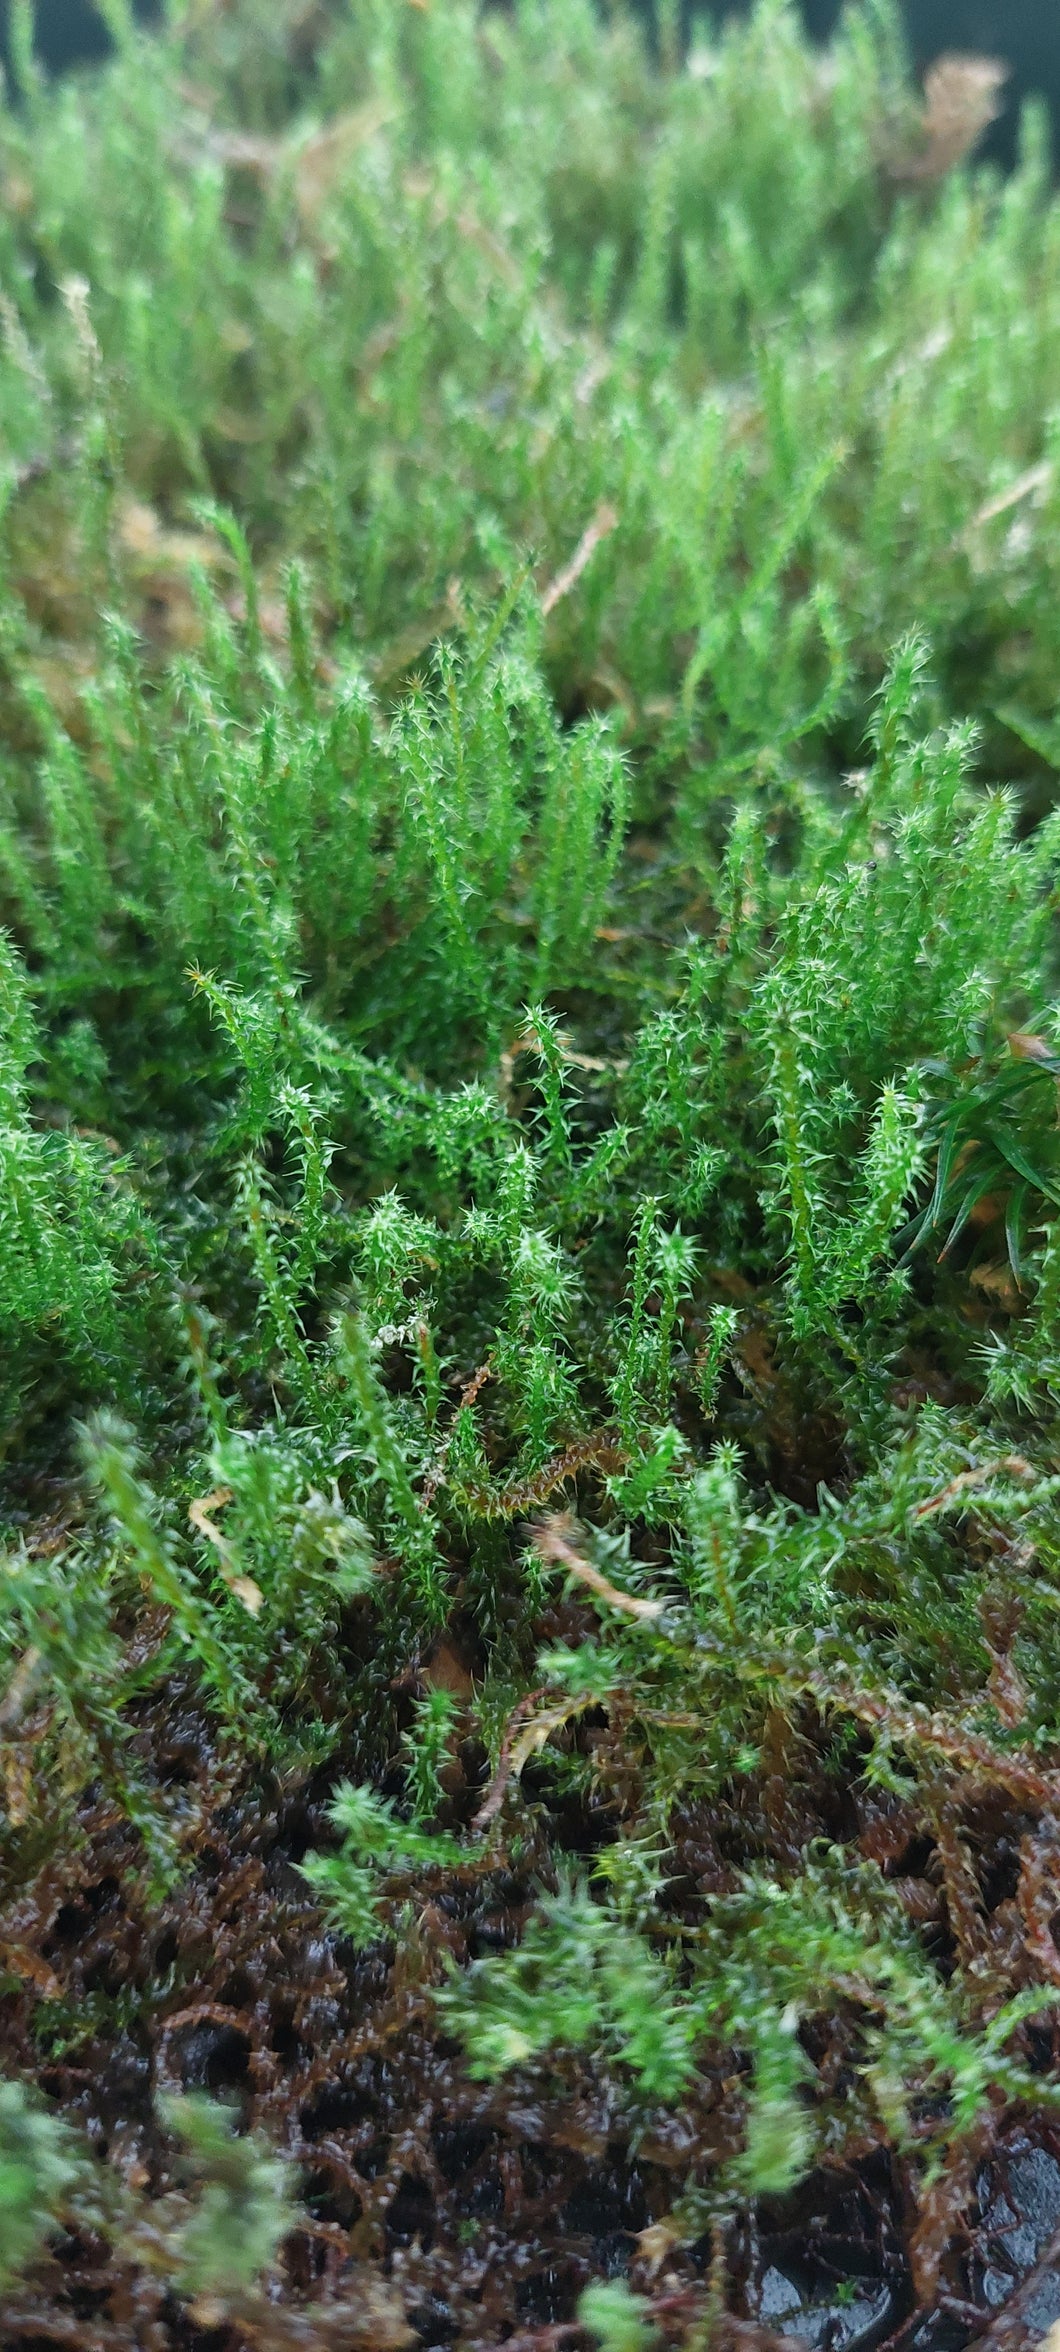 Springy Turf Moss Lawn